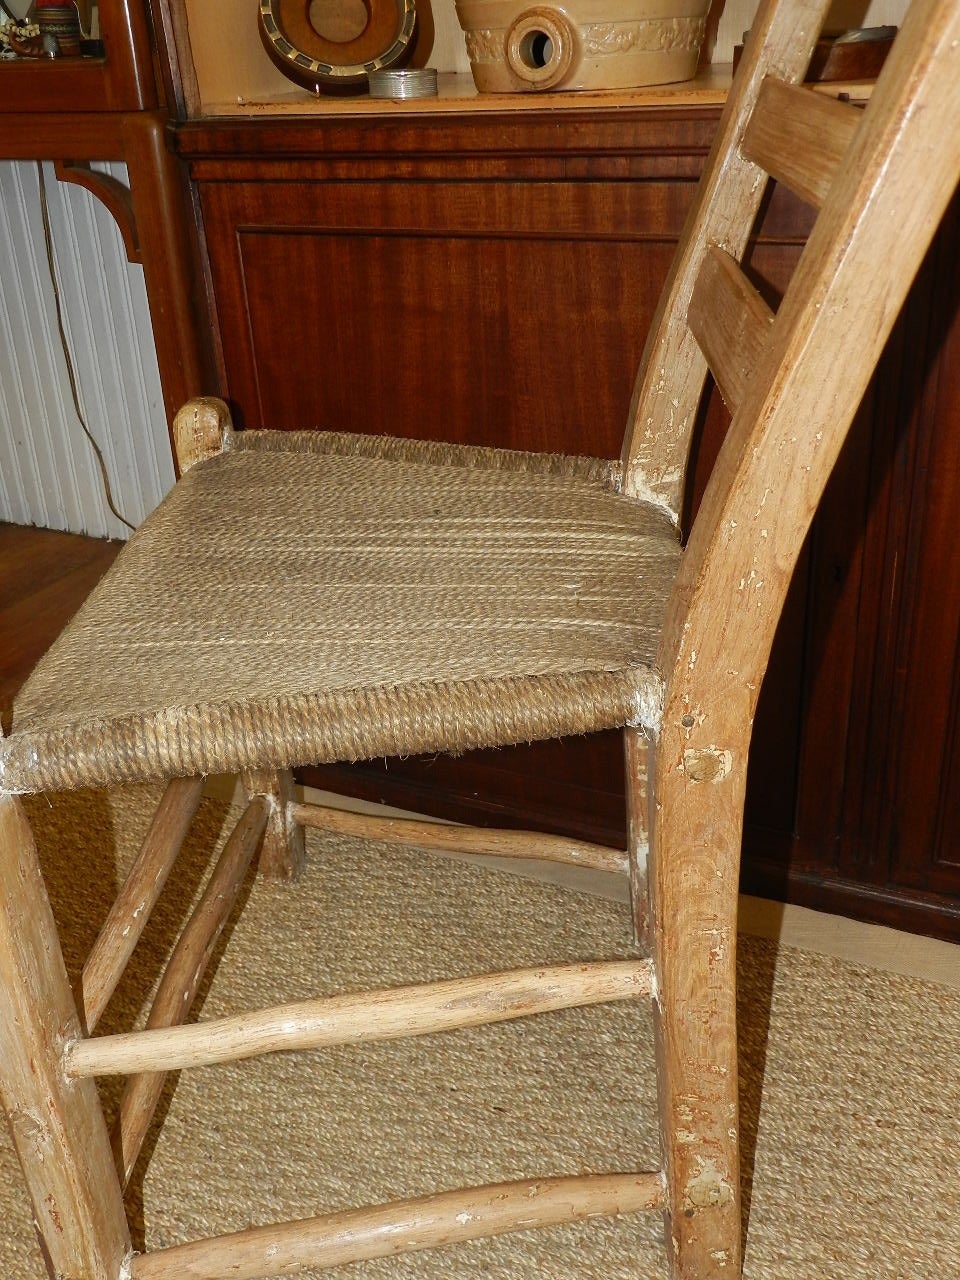 Scottish Orkney Island Chairs In Good Condition For Sale In Millwood, VA